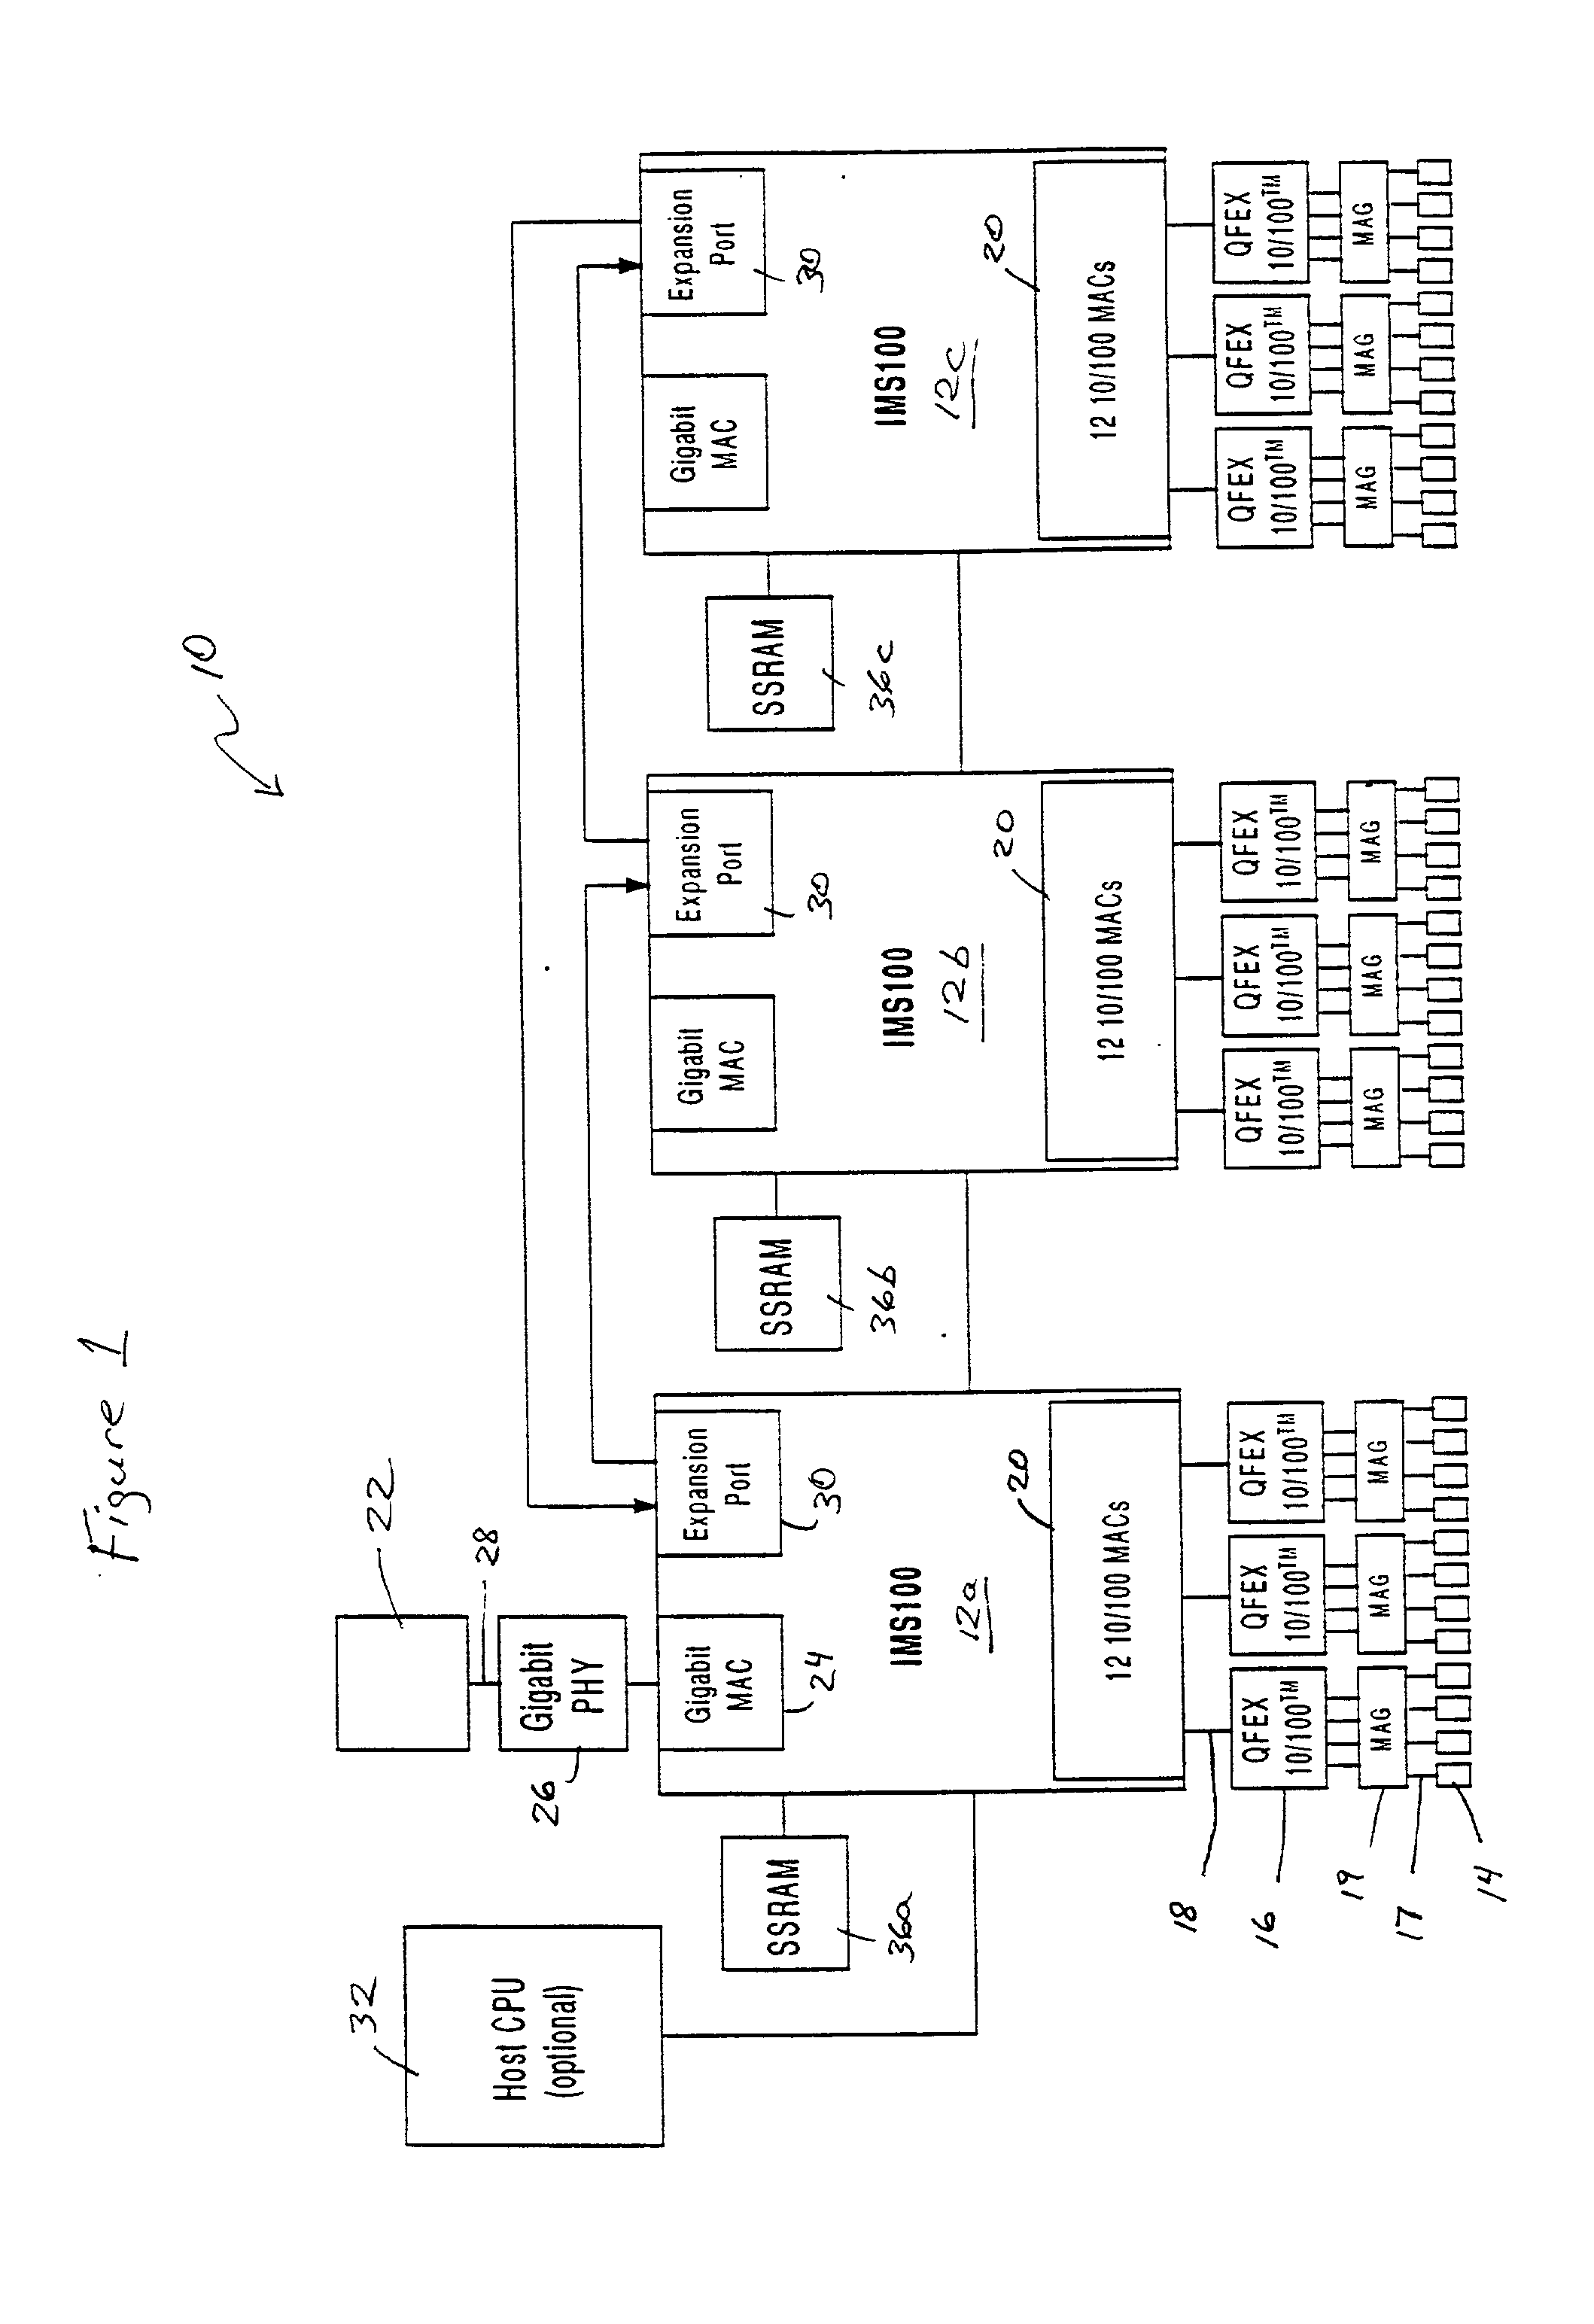 Apparatus and method in a network switch port for transferring data between buffer memory and transmit and receive state machines according to a prescribed interface protocol